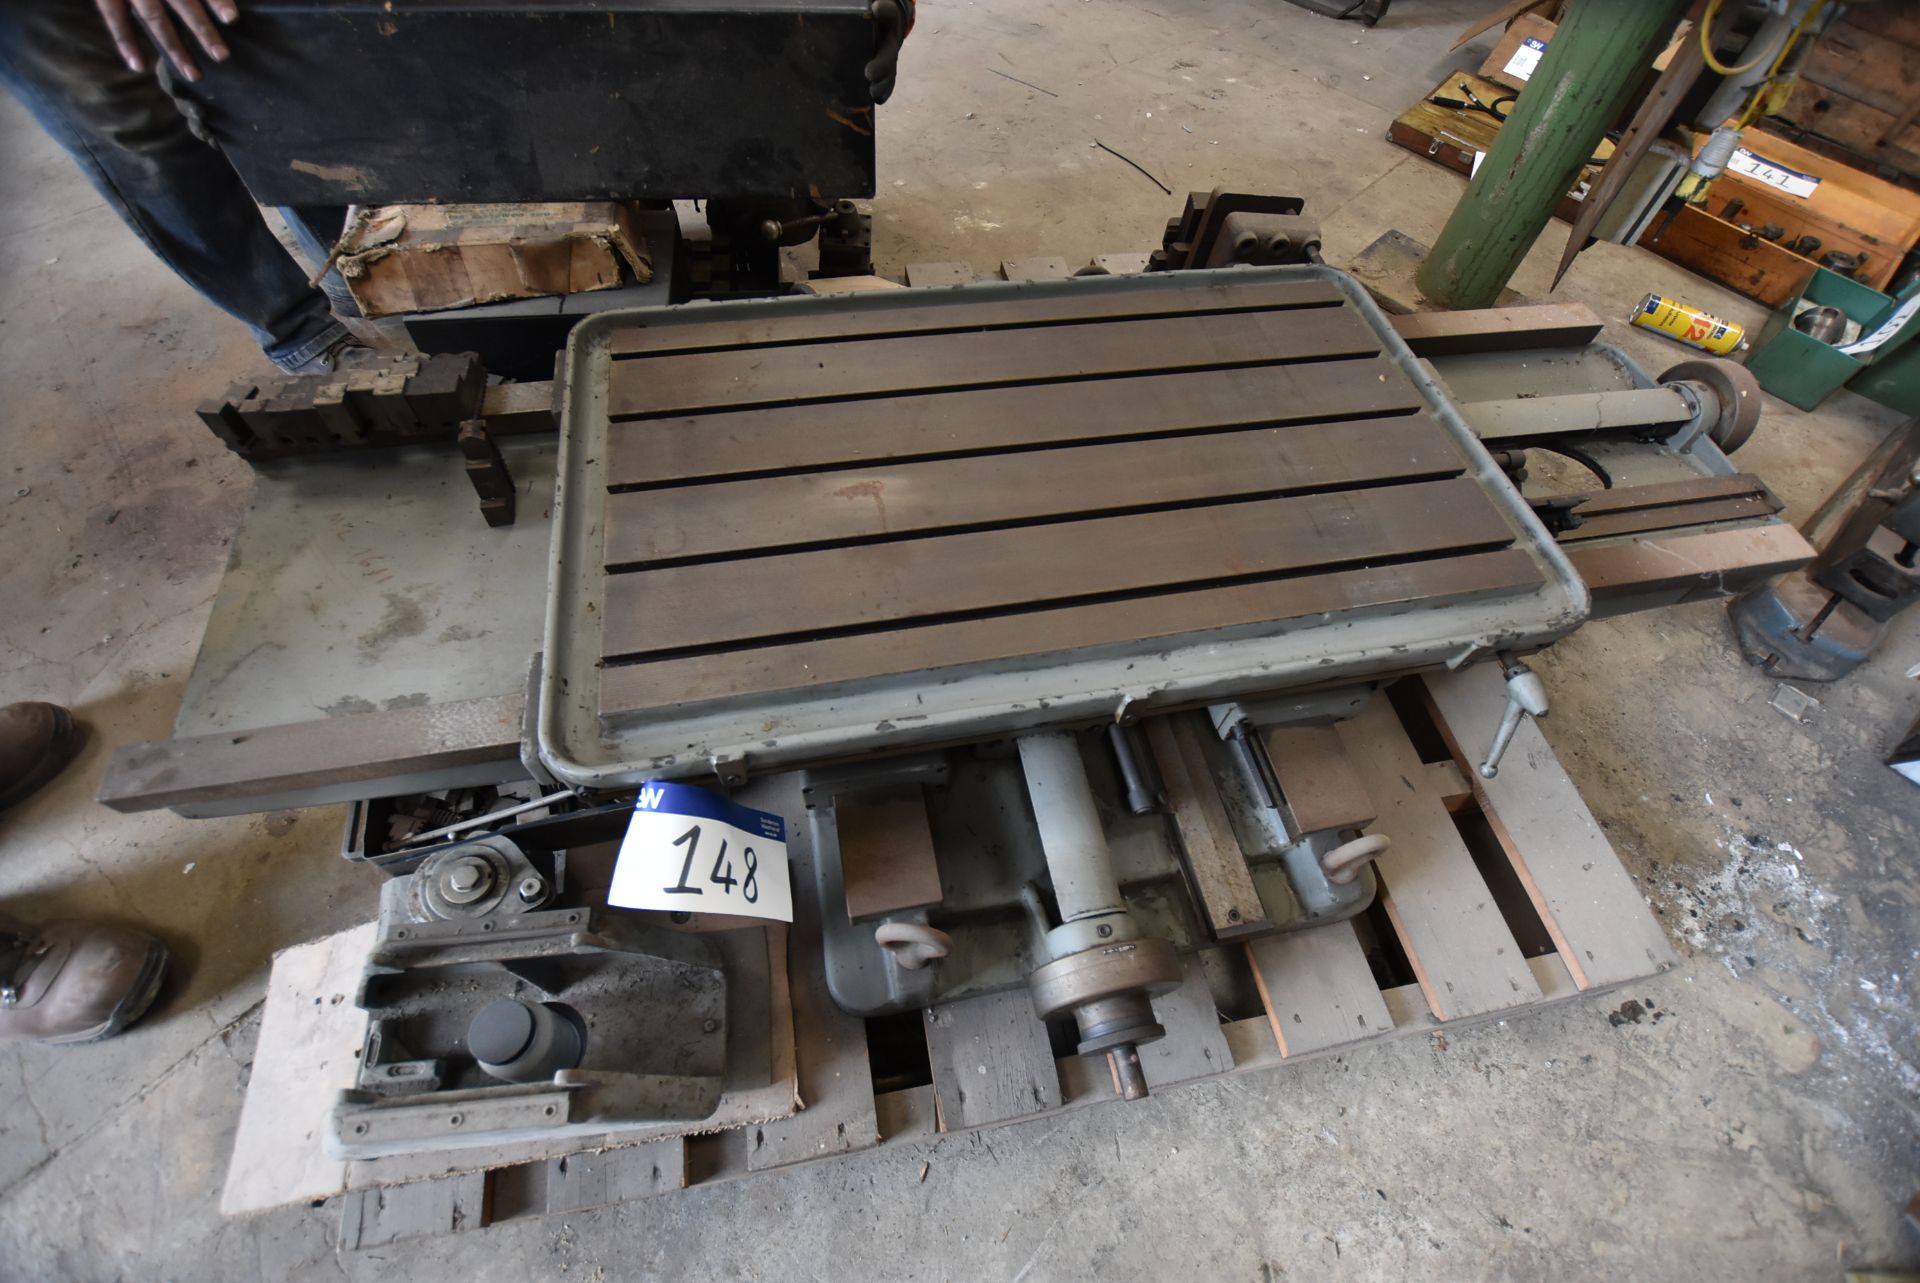 T-Slotted Compound Table, approx. 900mm x 500mm, for boring machine